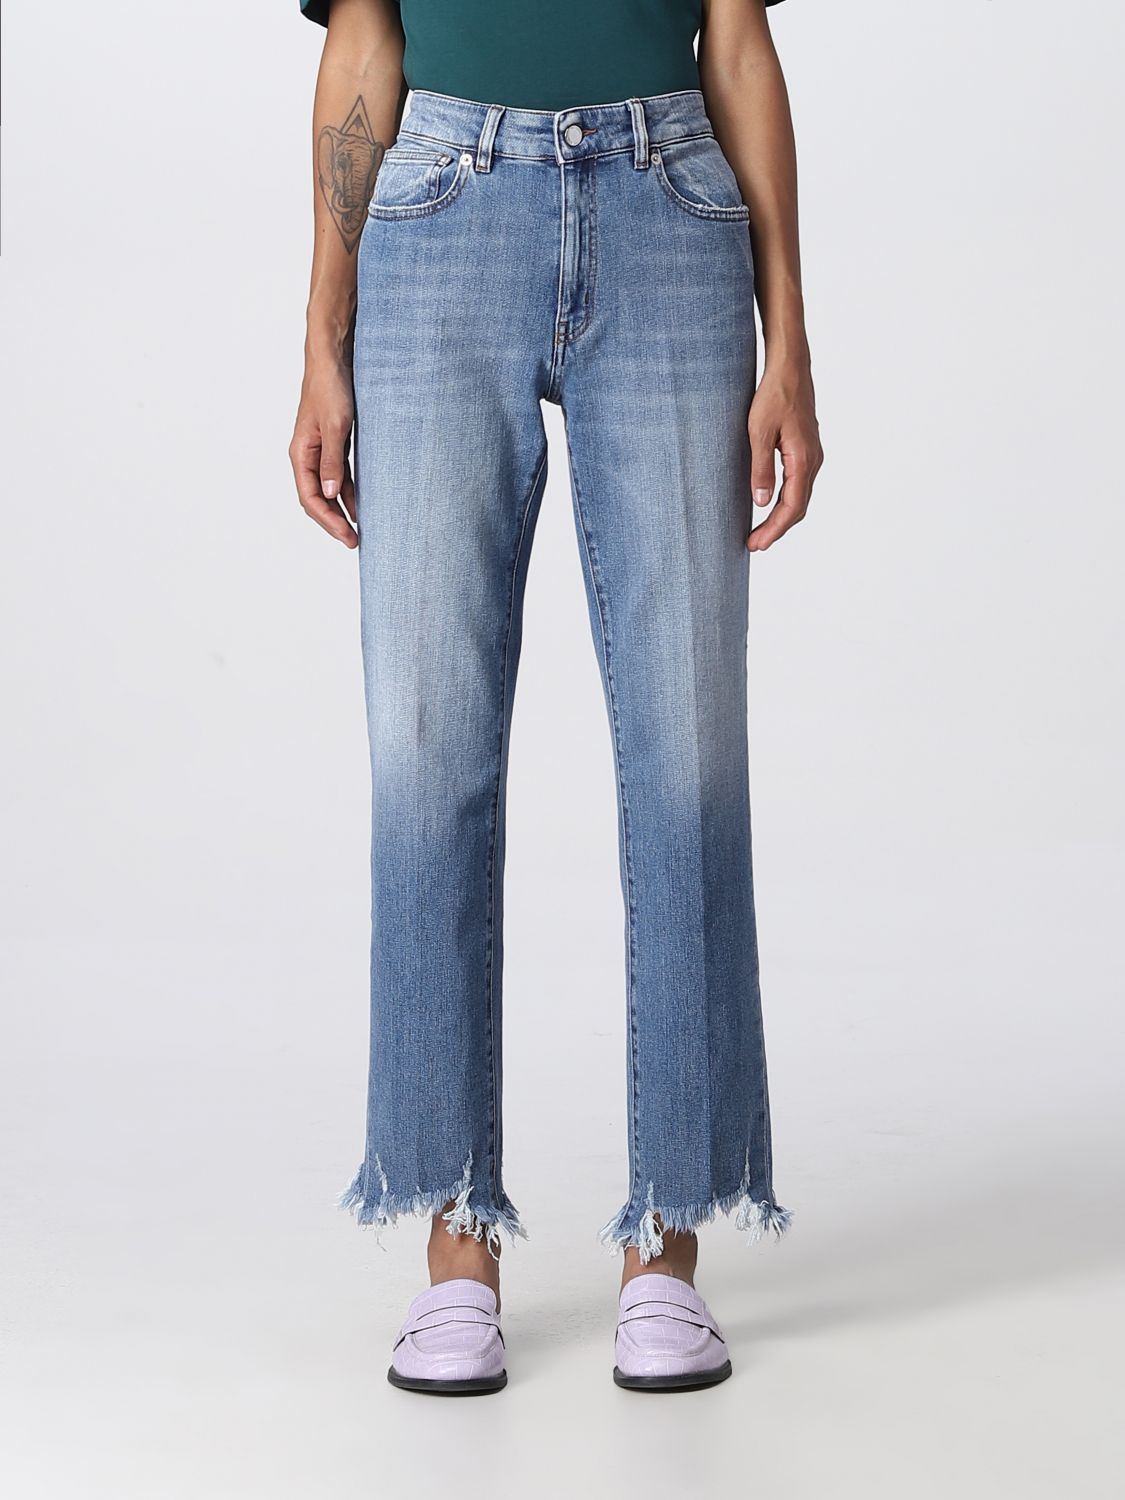 Love Moschino Outlet: jeans for woman - Denim | Love Moschino jeans WQ45481S3844 online GIGLIO.COM